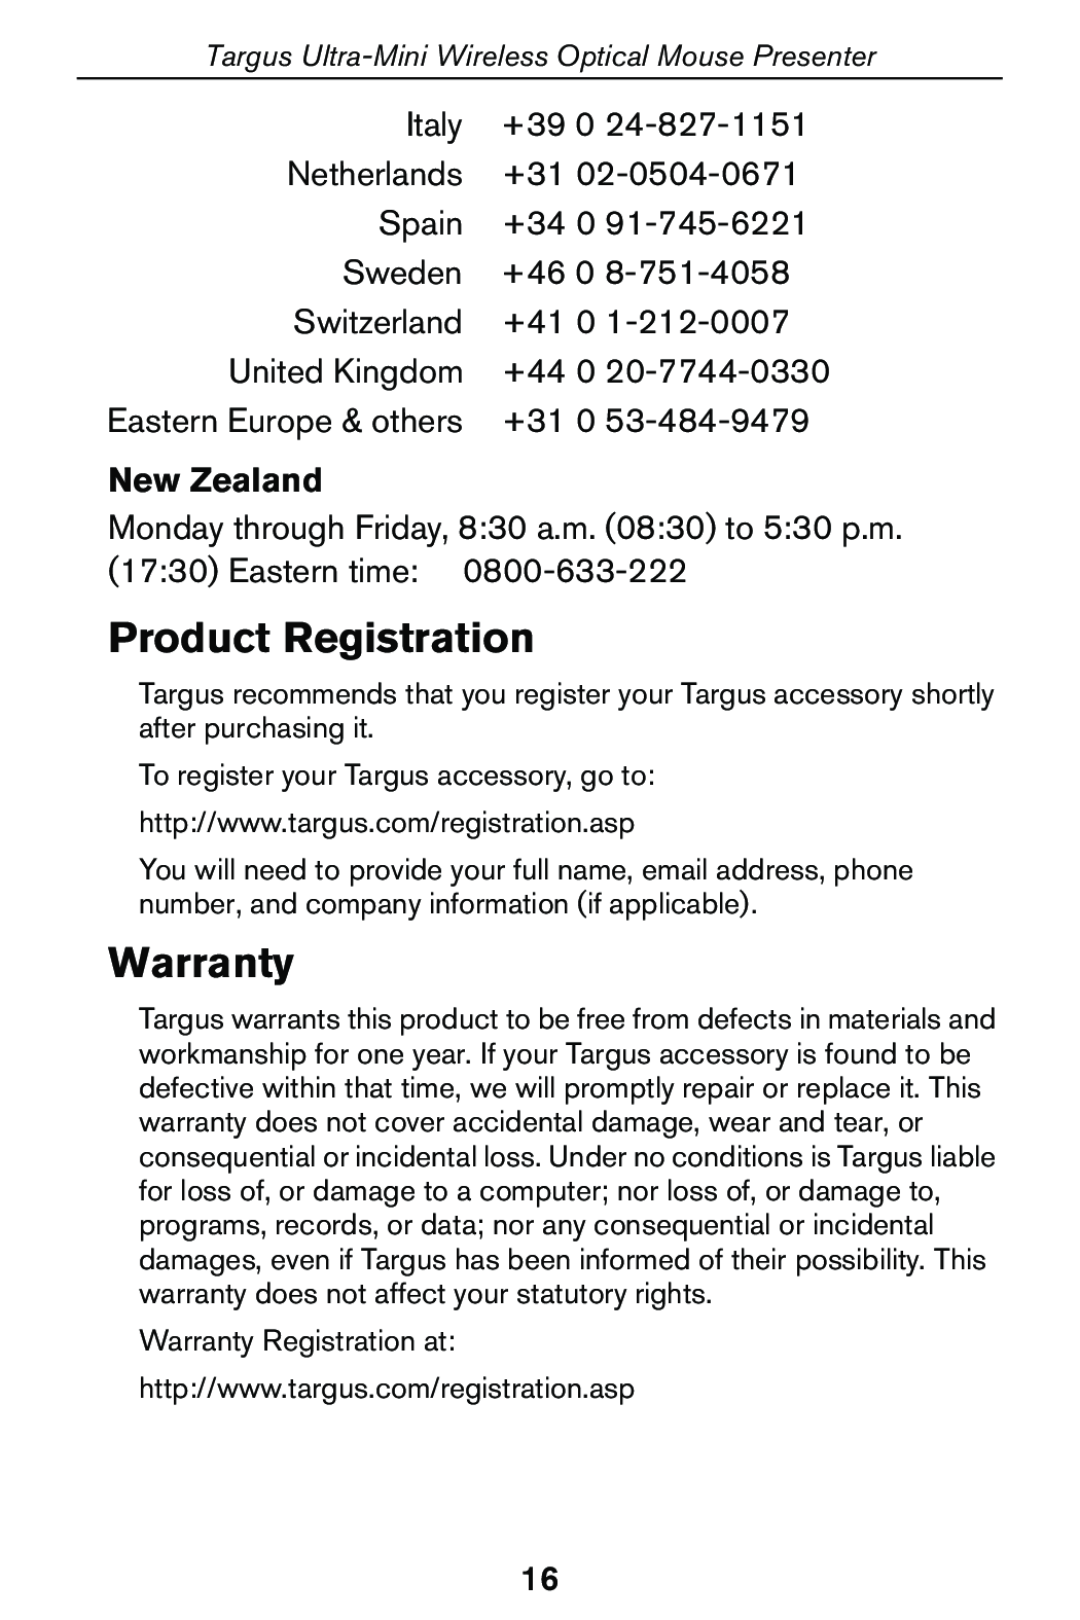 Targus 400-0140-001A specifications Product Registration, Warranty, New Zealand 